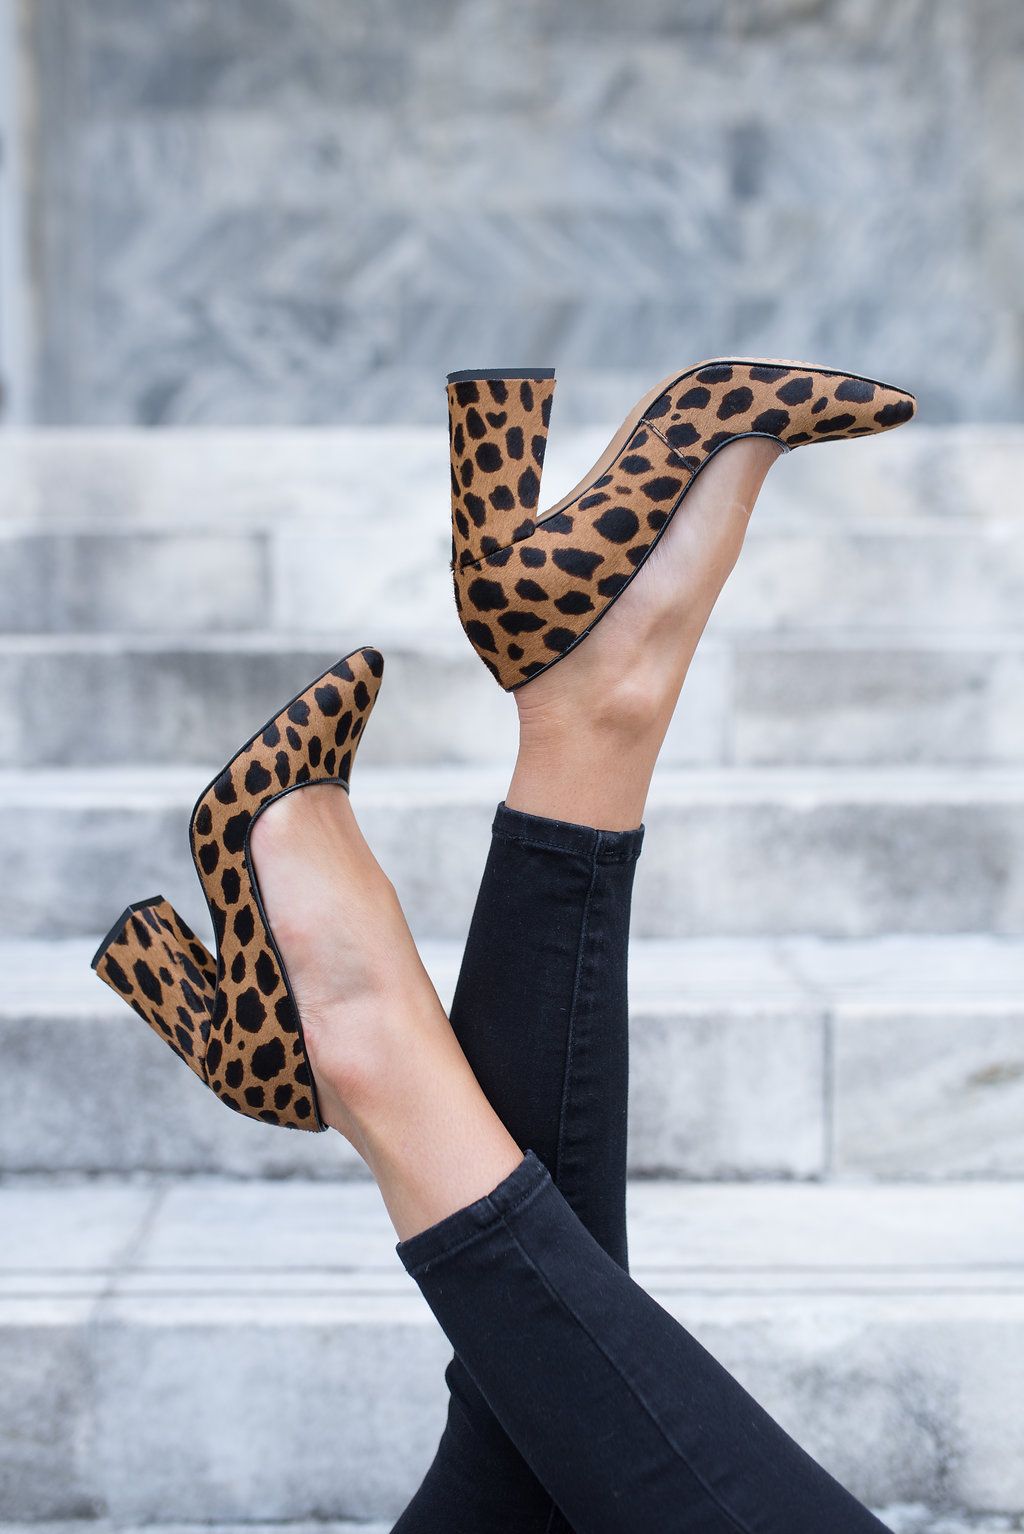 How to Incorporate Leopard Pumps Into
Your Wardrobe